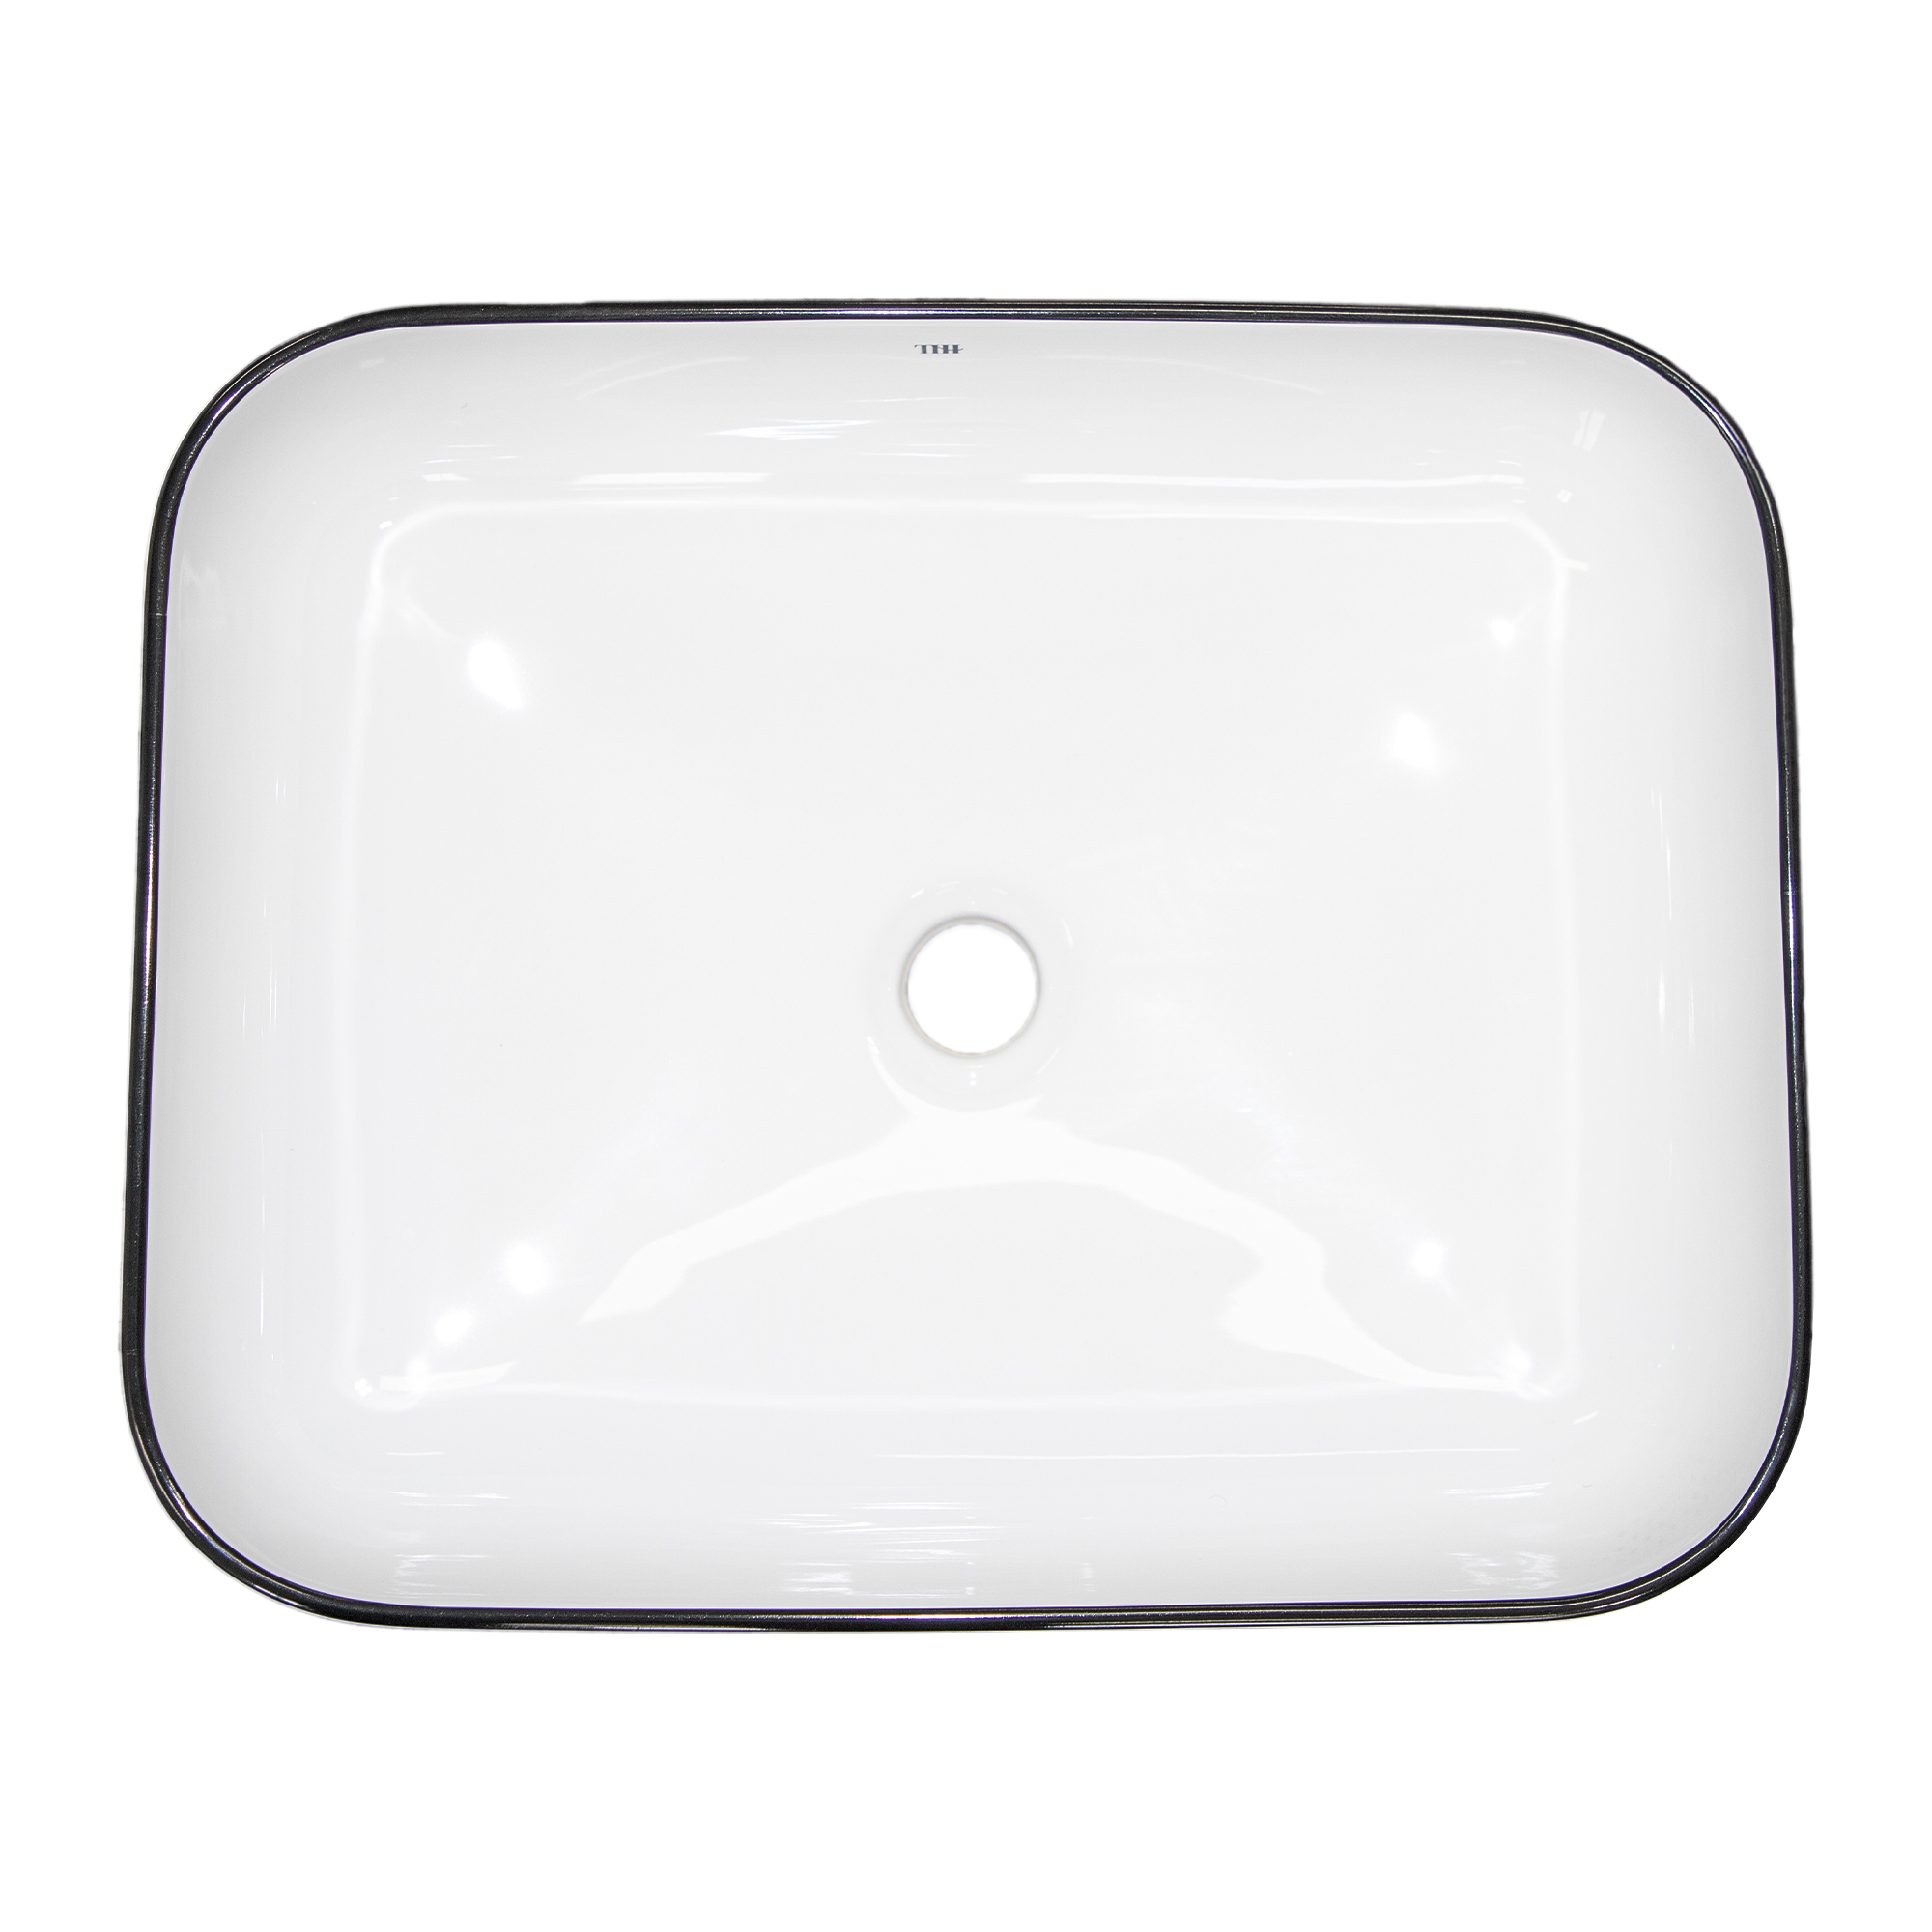 THH Above Counter Ceramic Bathroom Basin White with Black Line 510x400x135mm